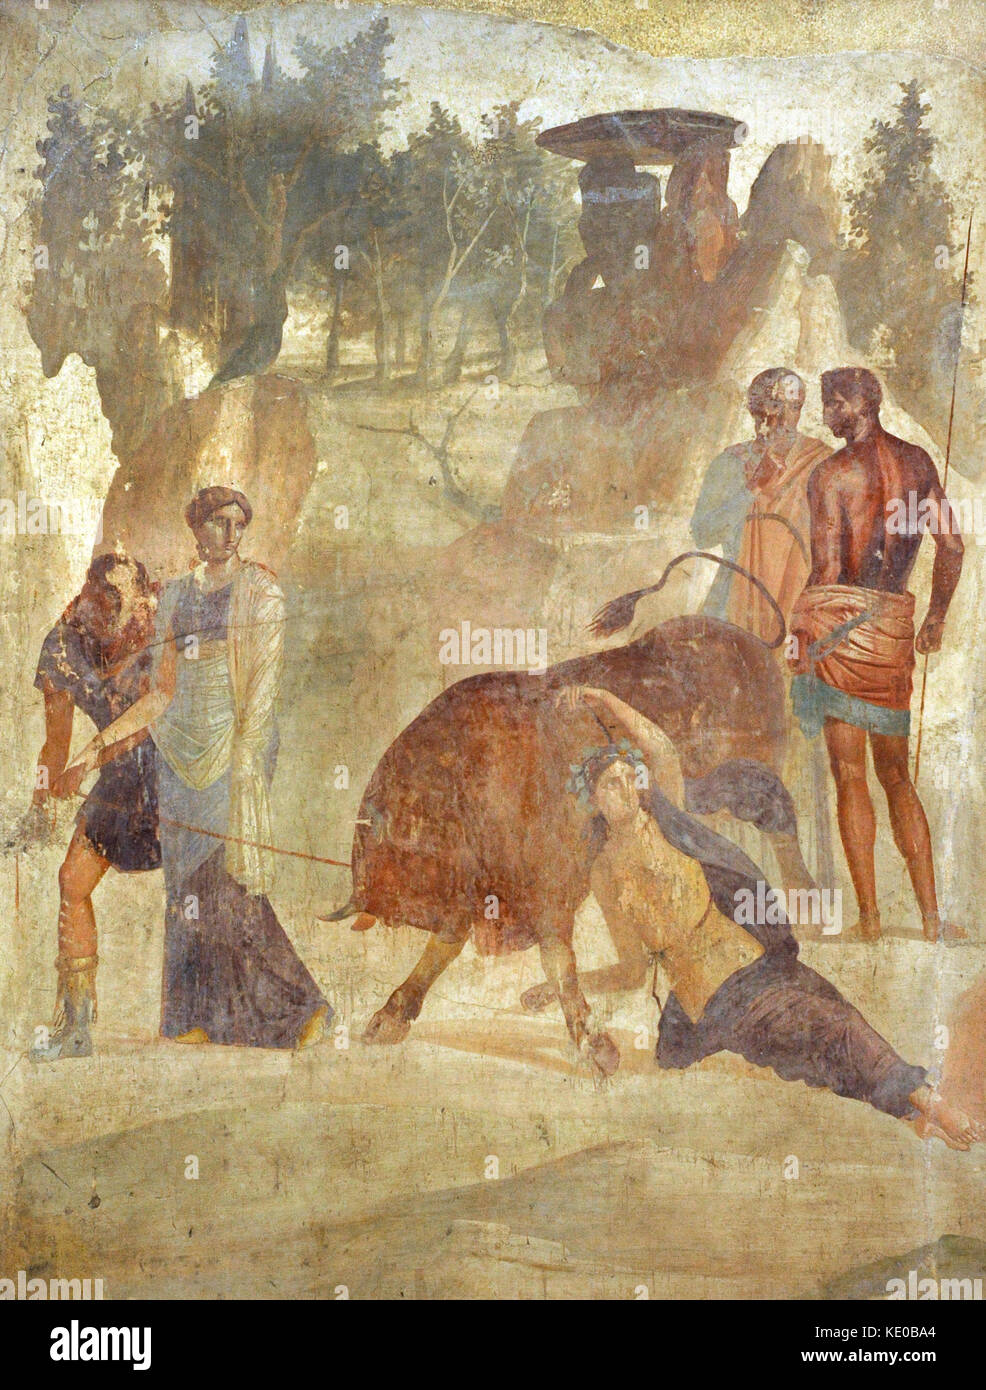 Roman fresco depicting Dirce tied to a bull by Amphion and Zeto to avenge his mother Antiope. First imperial era. House of the Grand Duke of Tuscany, Pompeii. National Archaeological Museum. Naples. Italy. Stock Photo